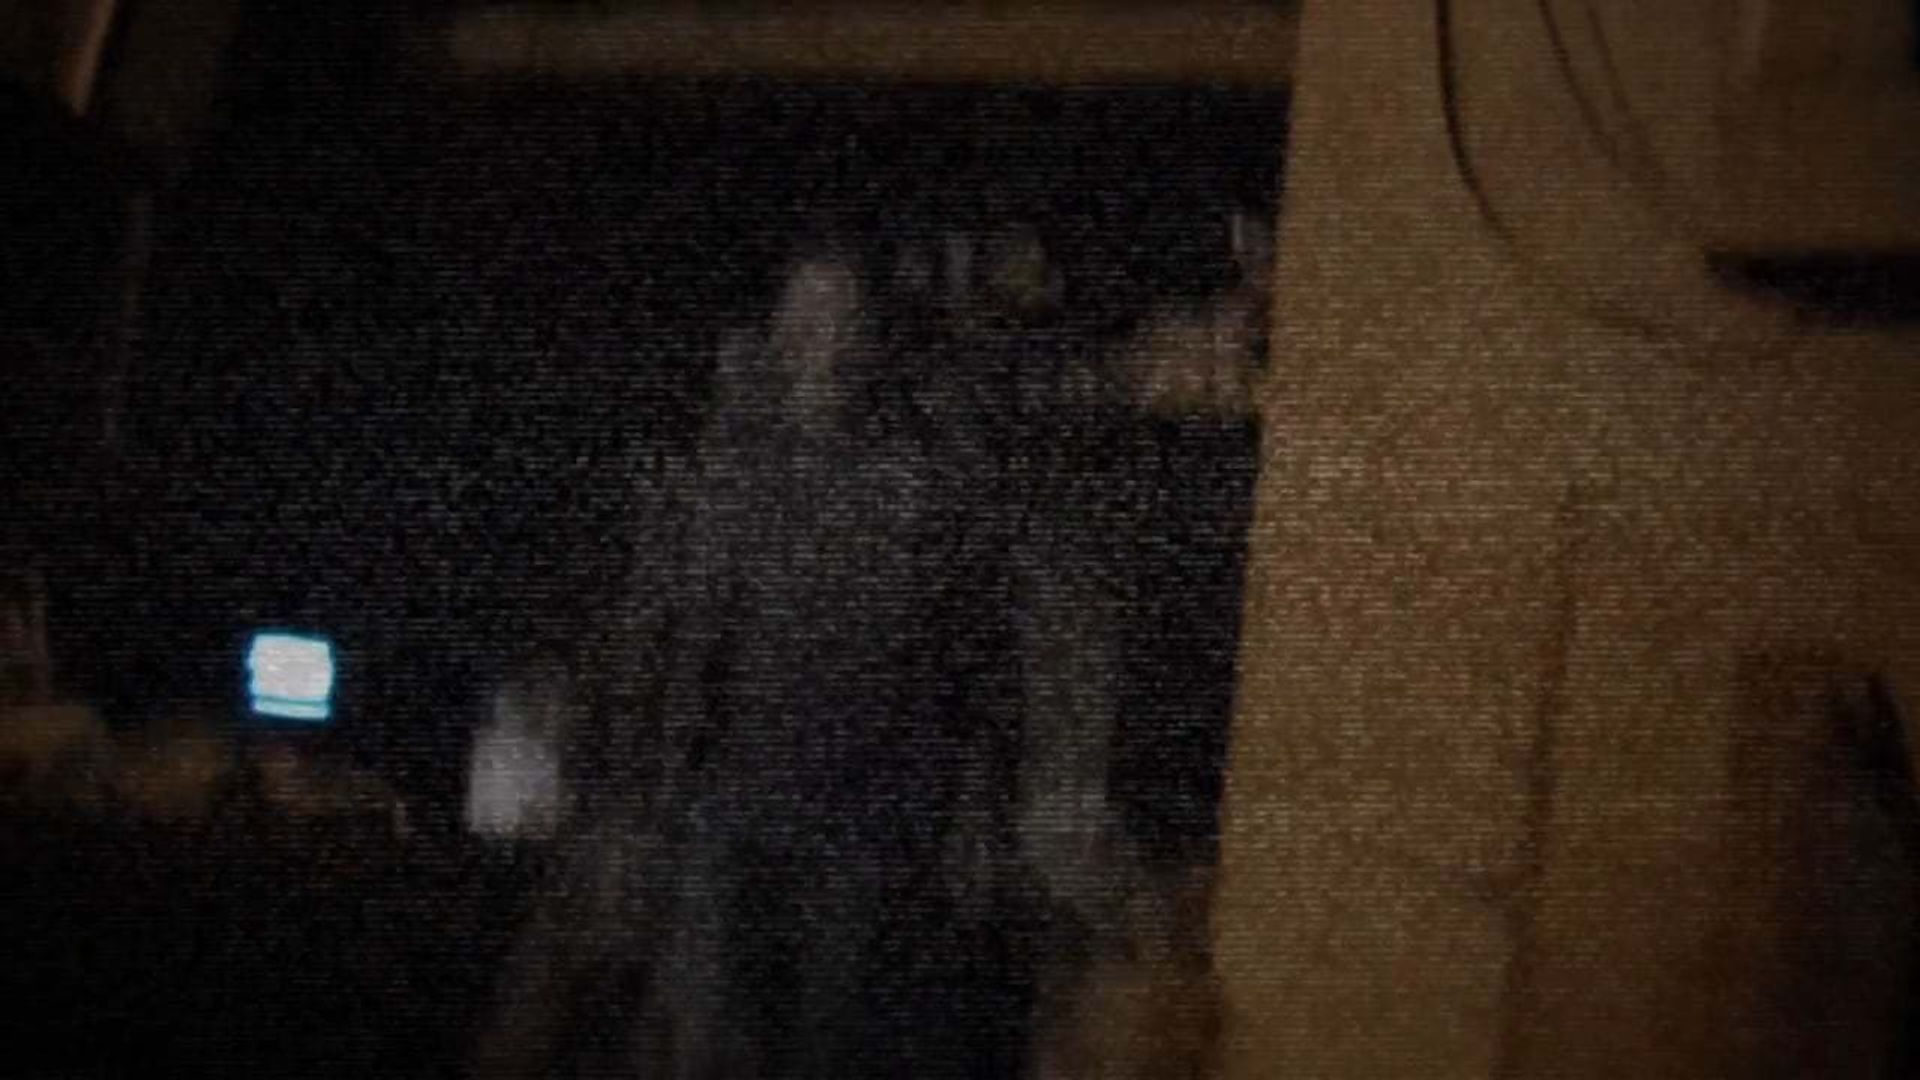 The Coffin Footage background